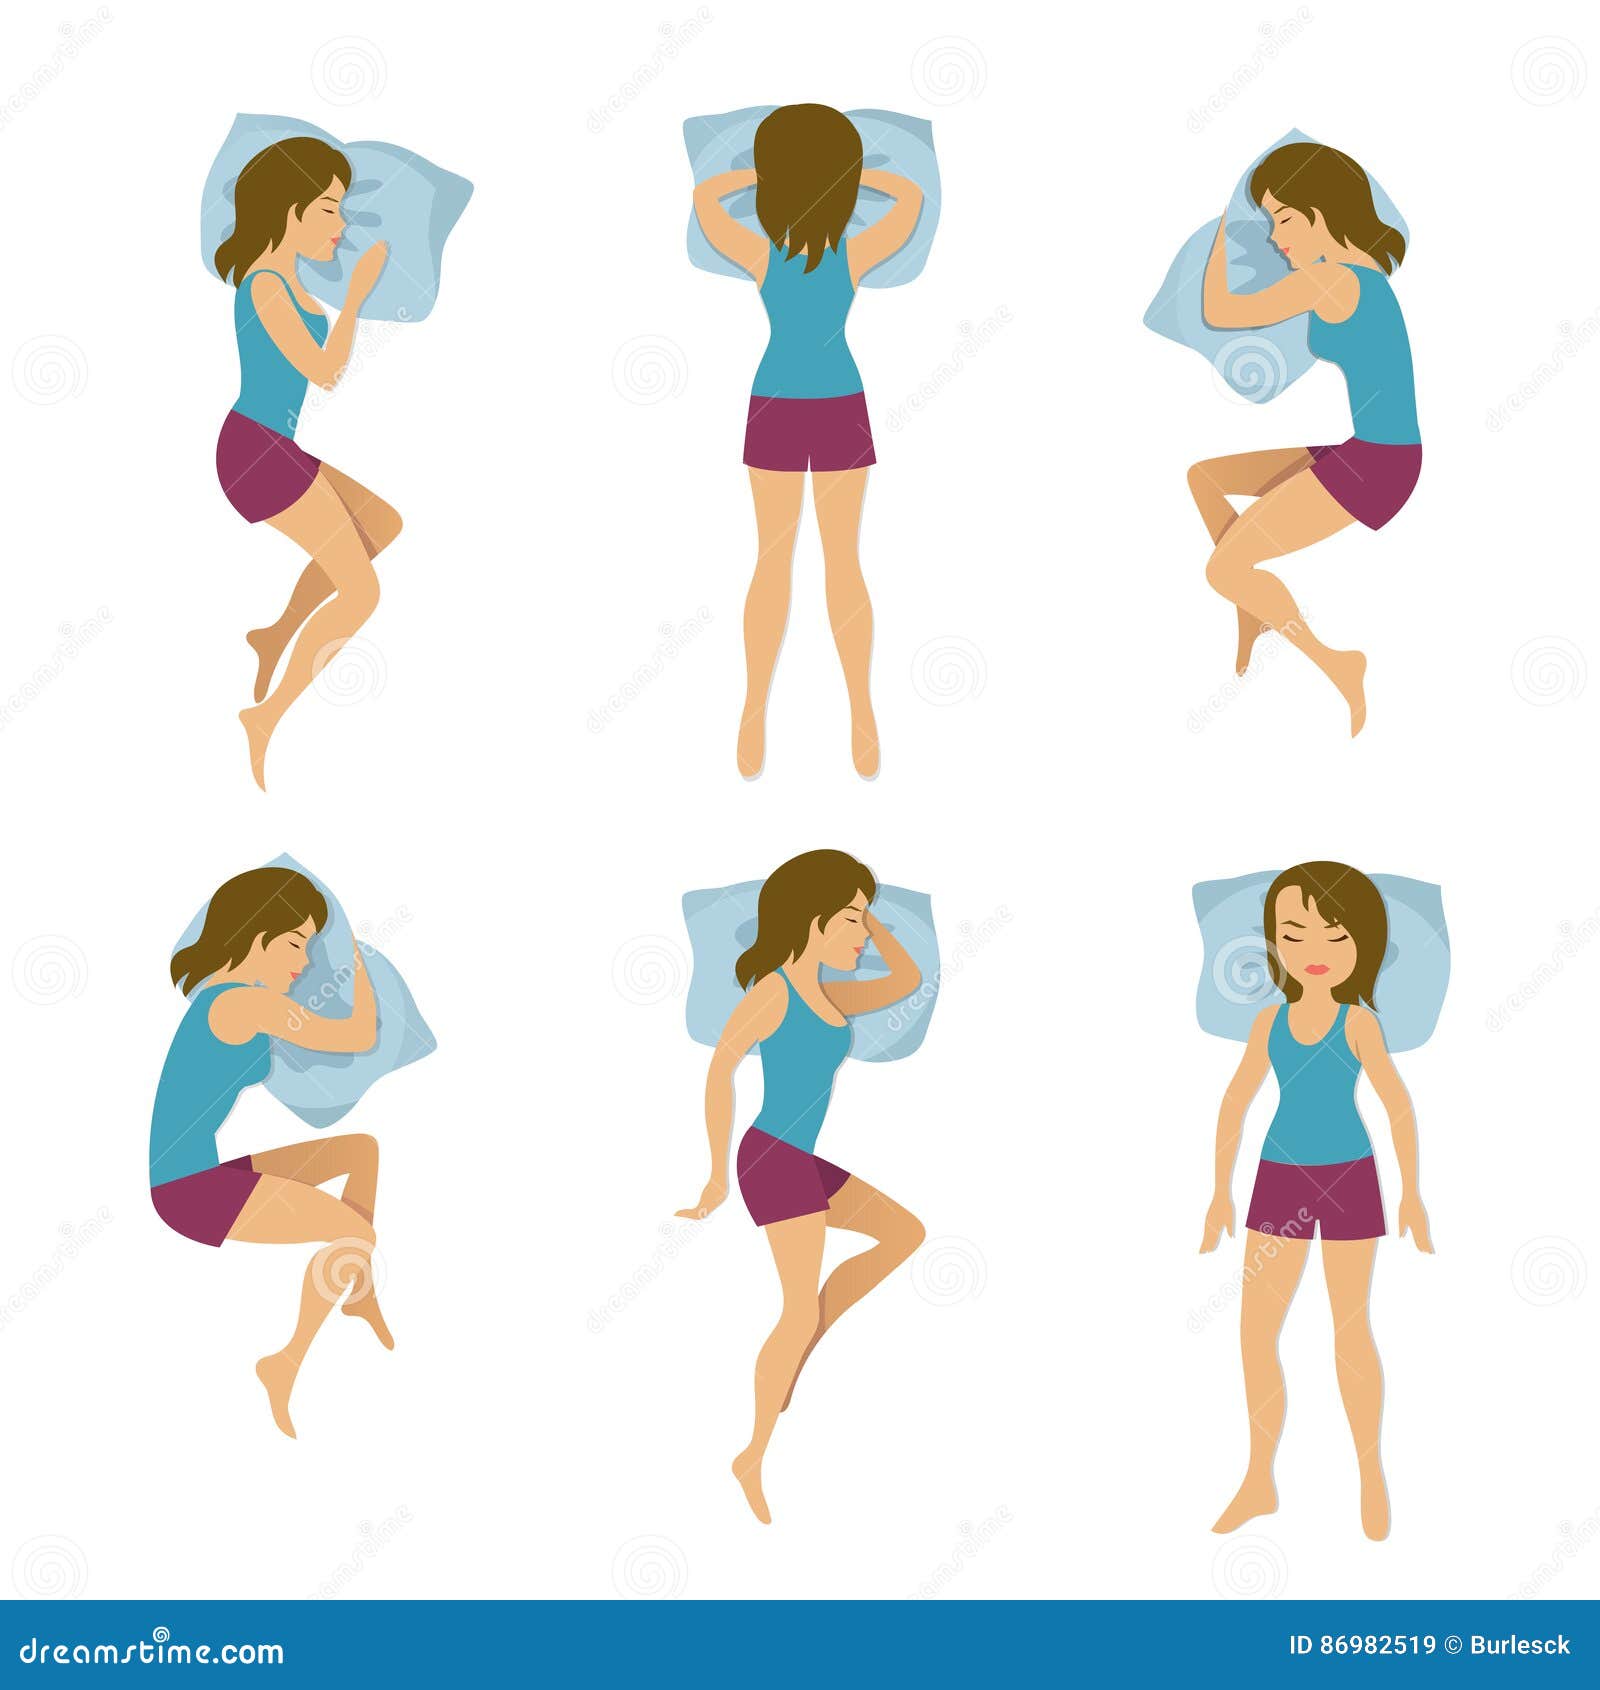 https://thumbs.dreamstime.com/z/women-sleeping-positions-vector-illustration-woman-sleep-poses-bed-young-girl-rest-different-86982519.jpg